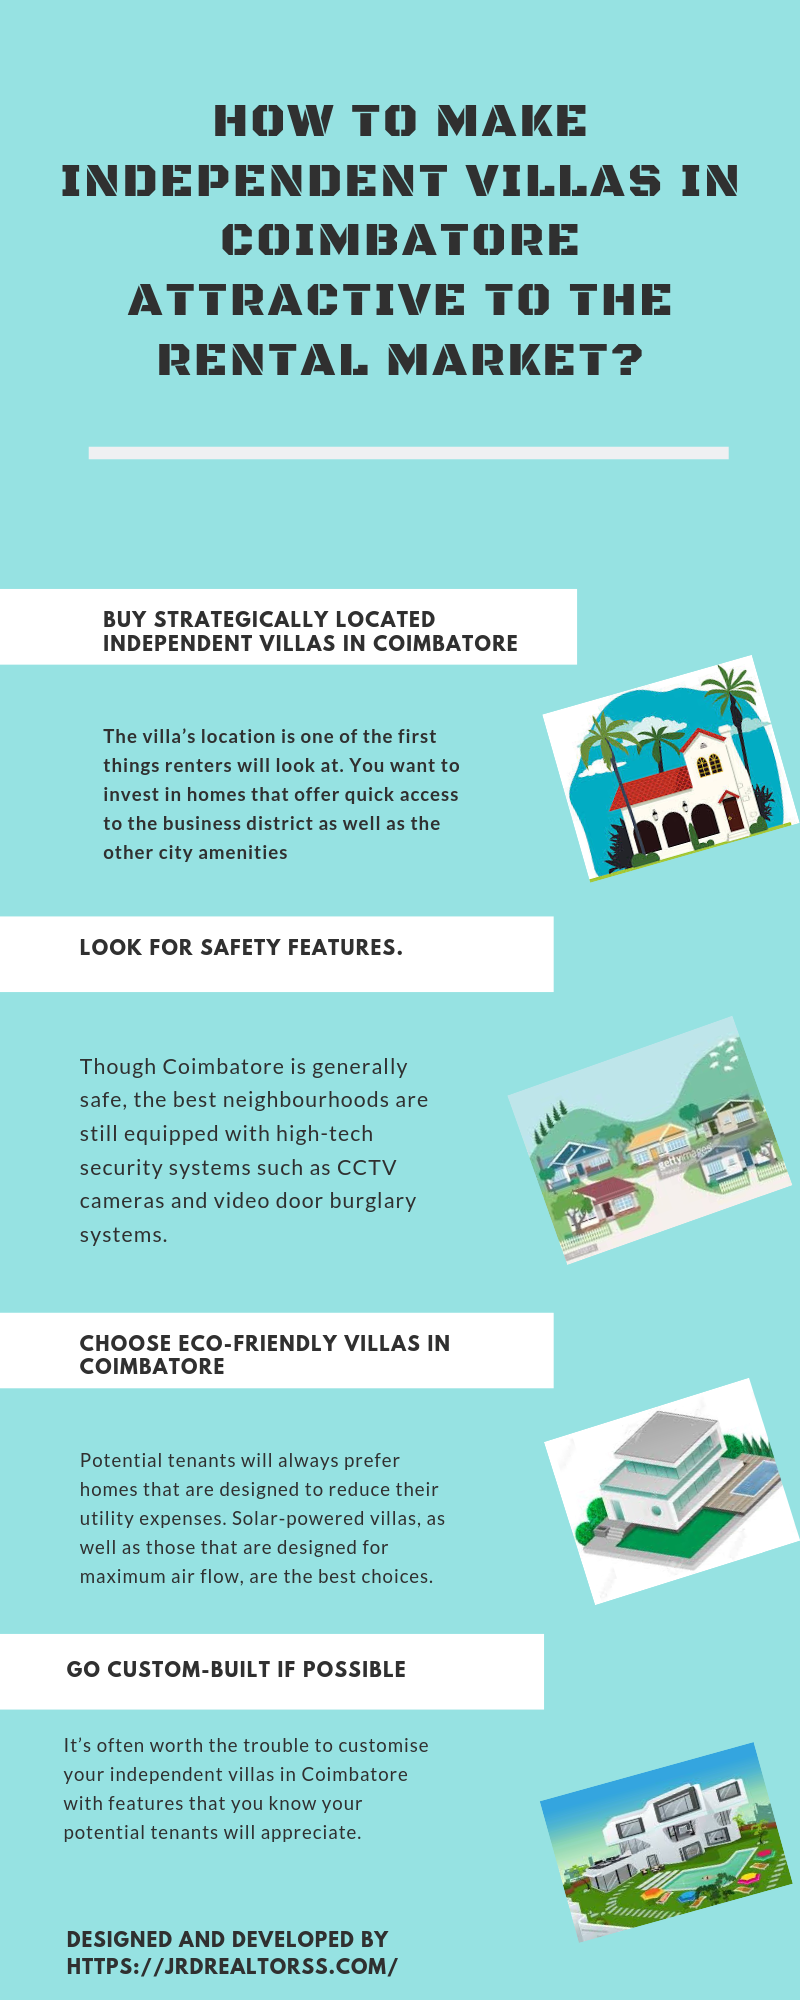 How to Make Independent Villas in Coimbatore Attractive to the Rental Market.png  by Jrdrealtorss